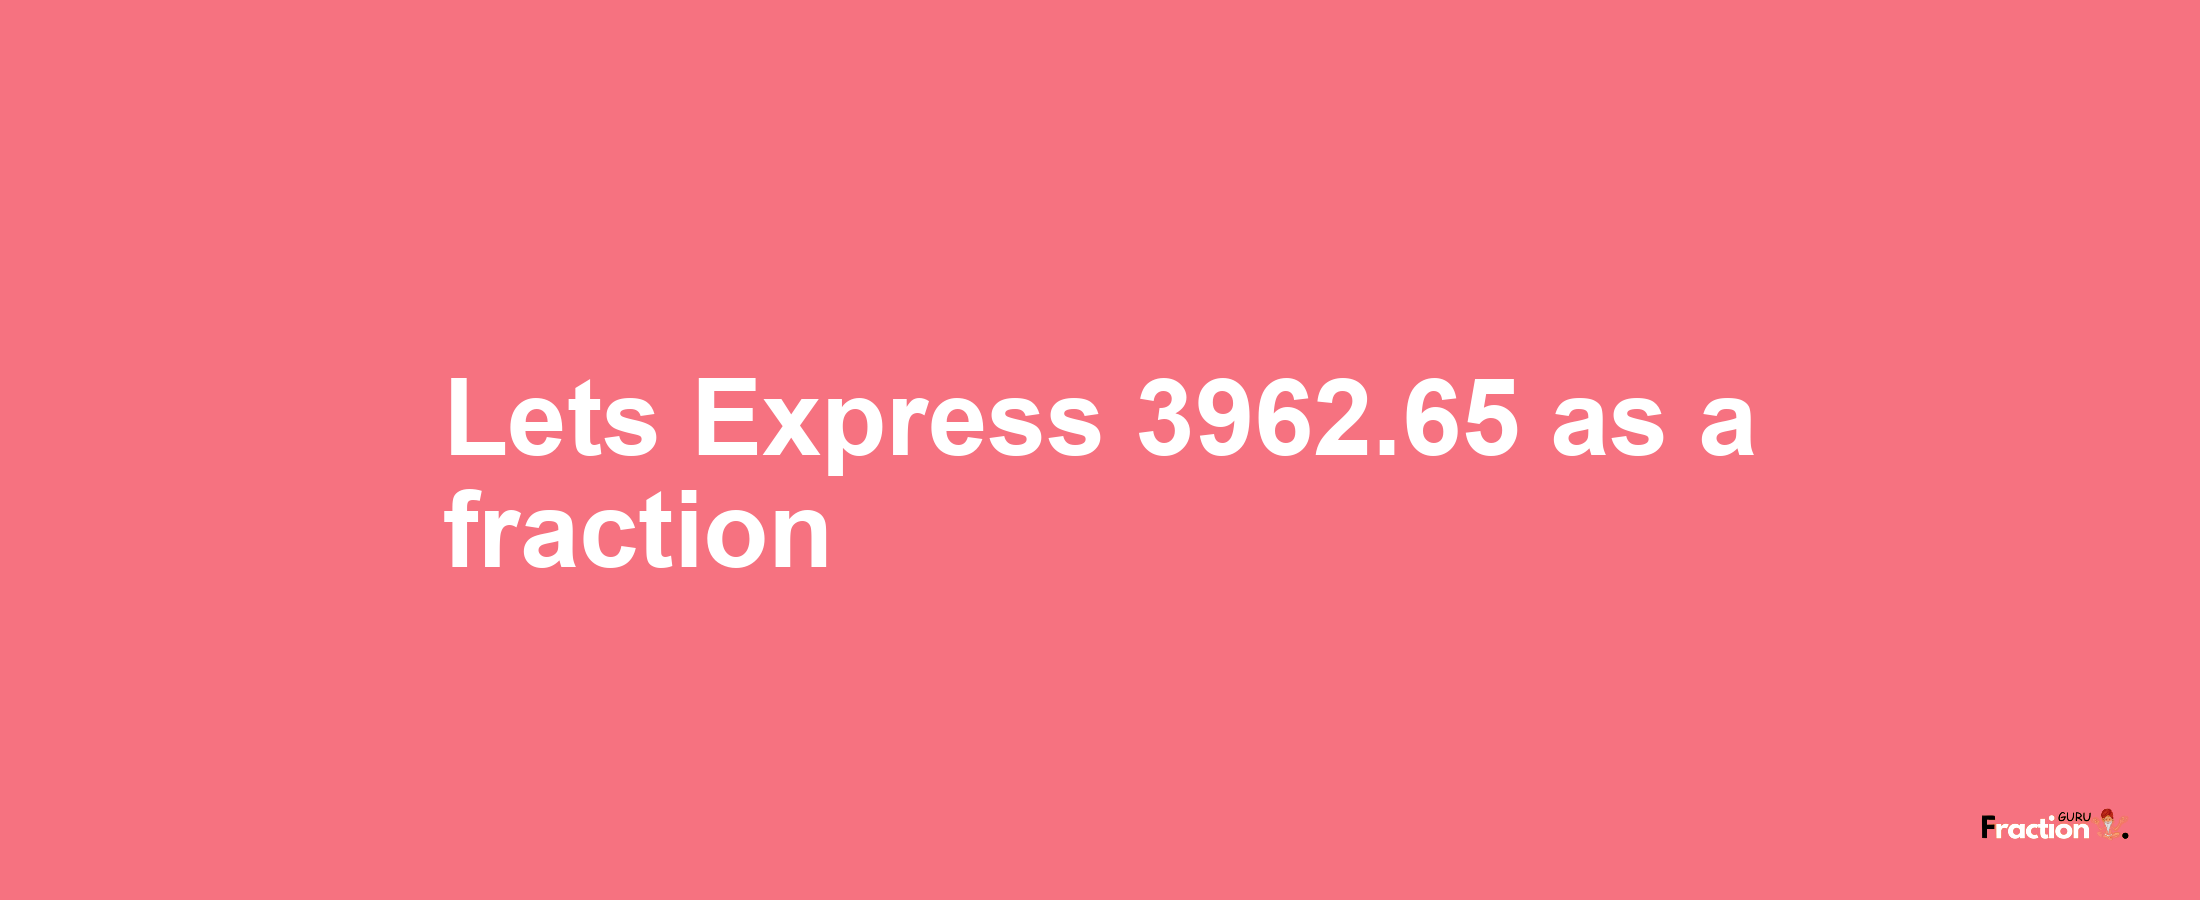 Lets Express 3962.65 as afraction